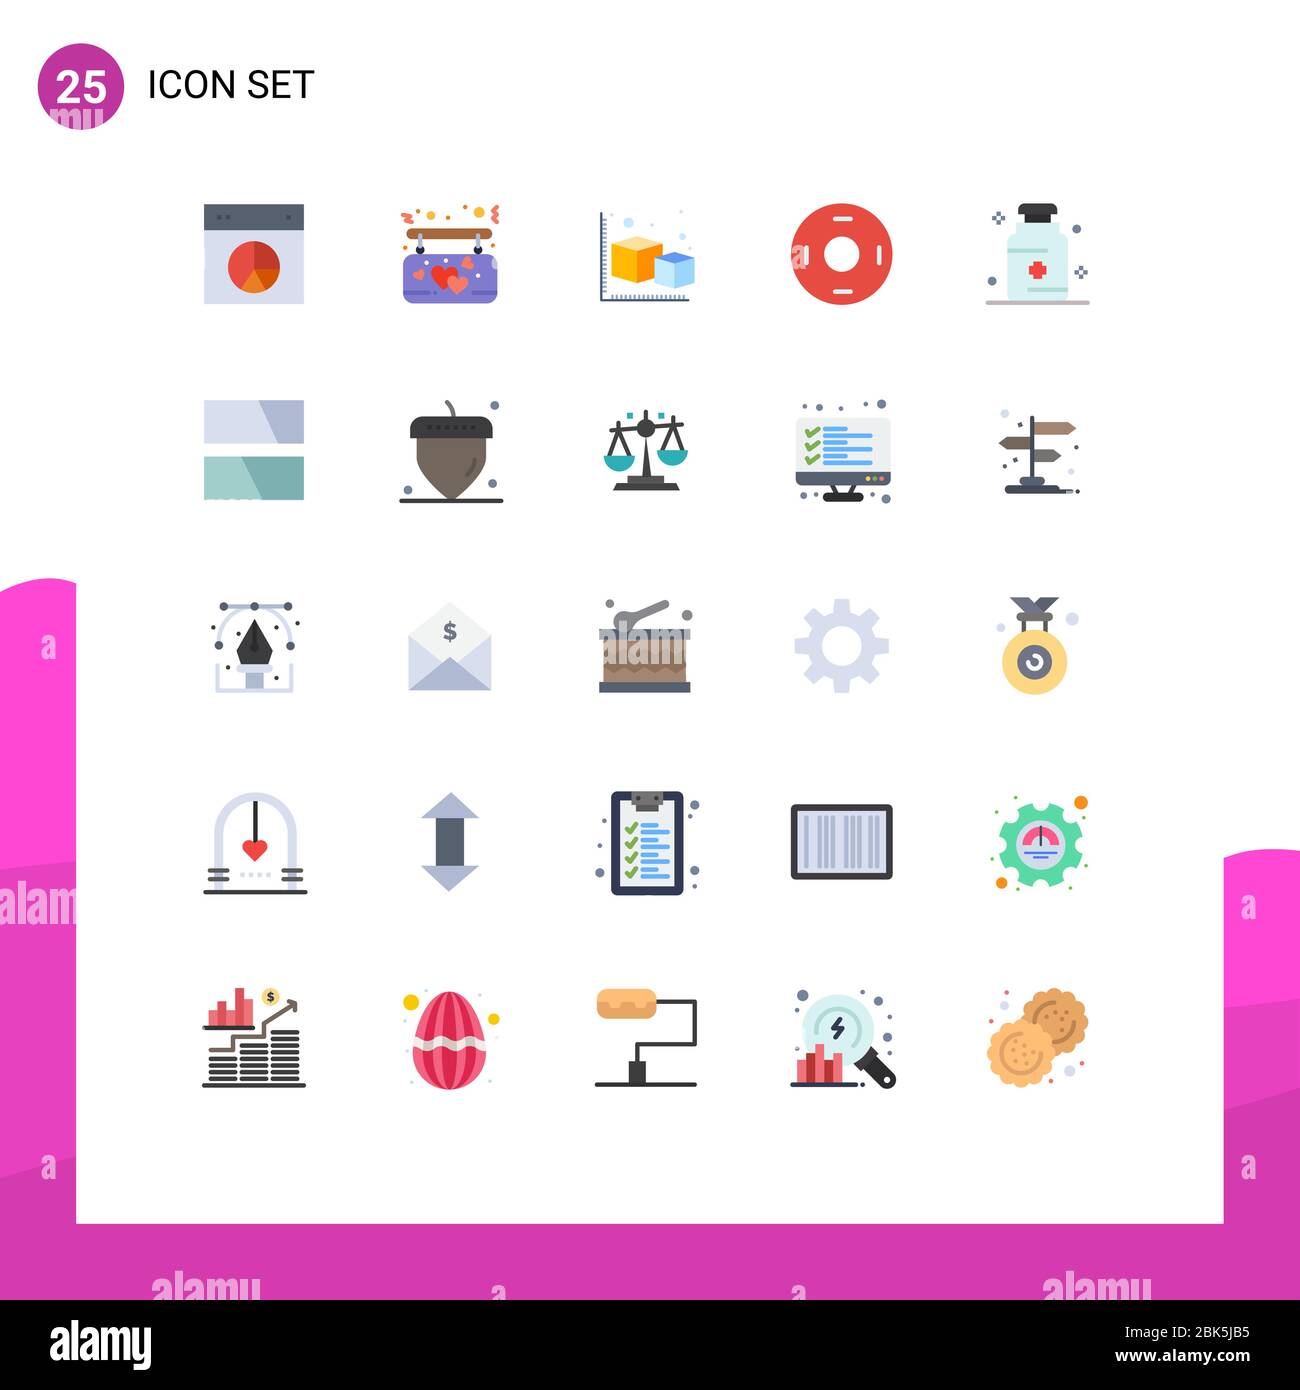 User Interface Pack of 25 Basic Flat Colors of health, symbolism, love, sign, object Editable Vector Design Elements Stock Vector